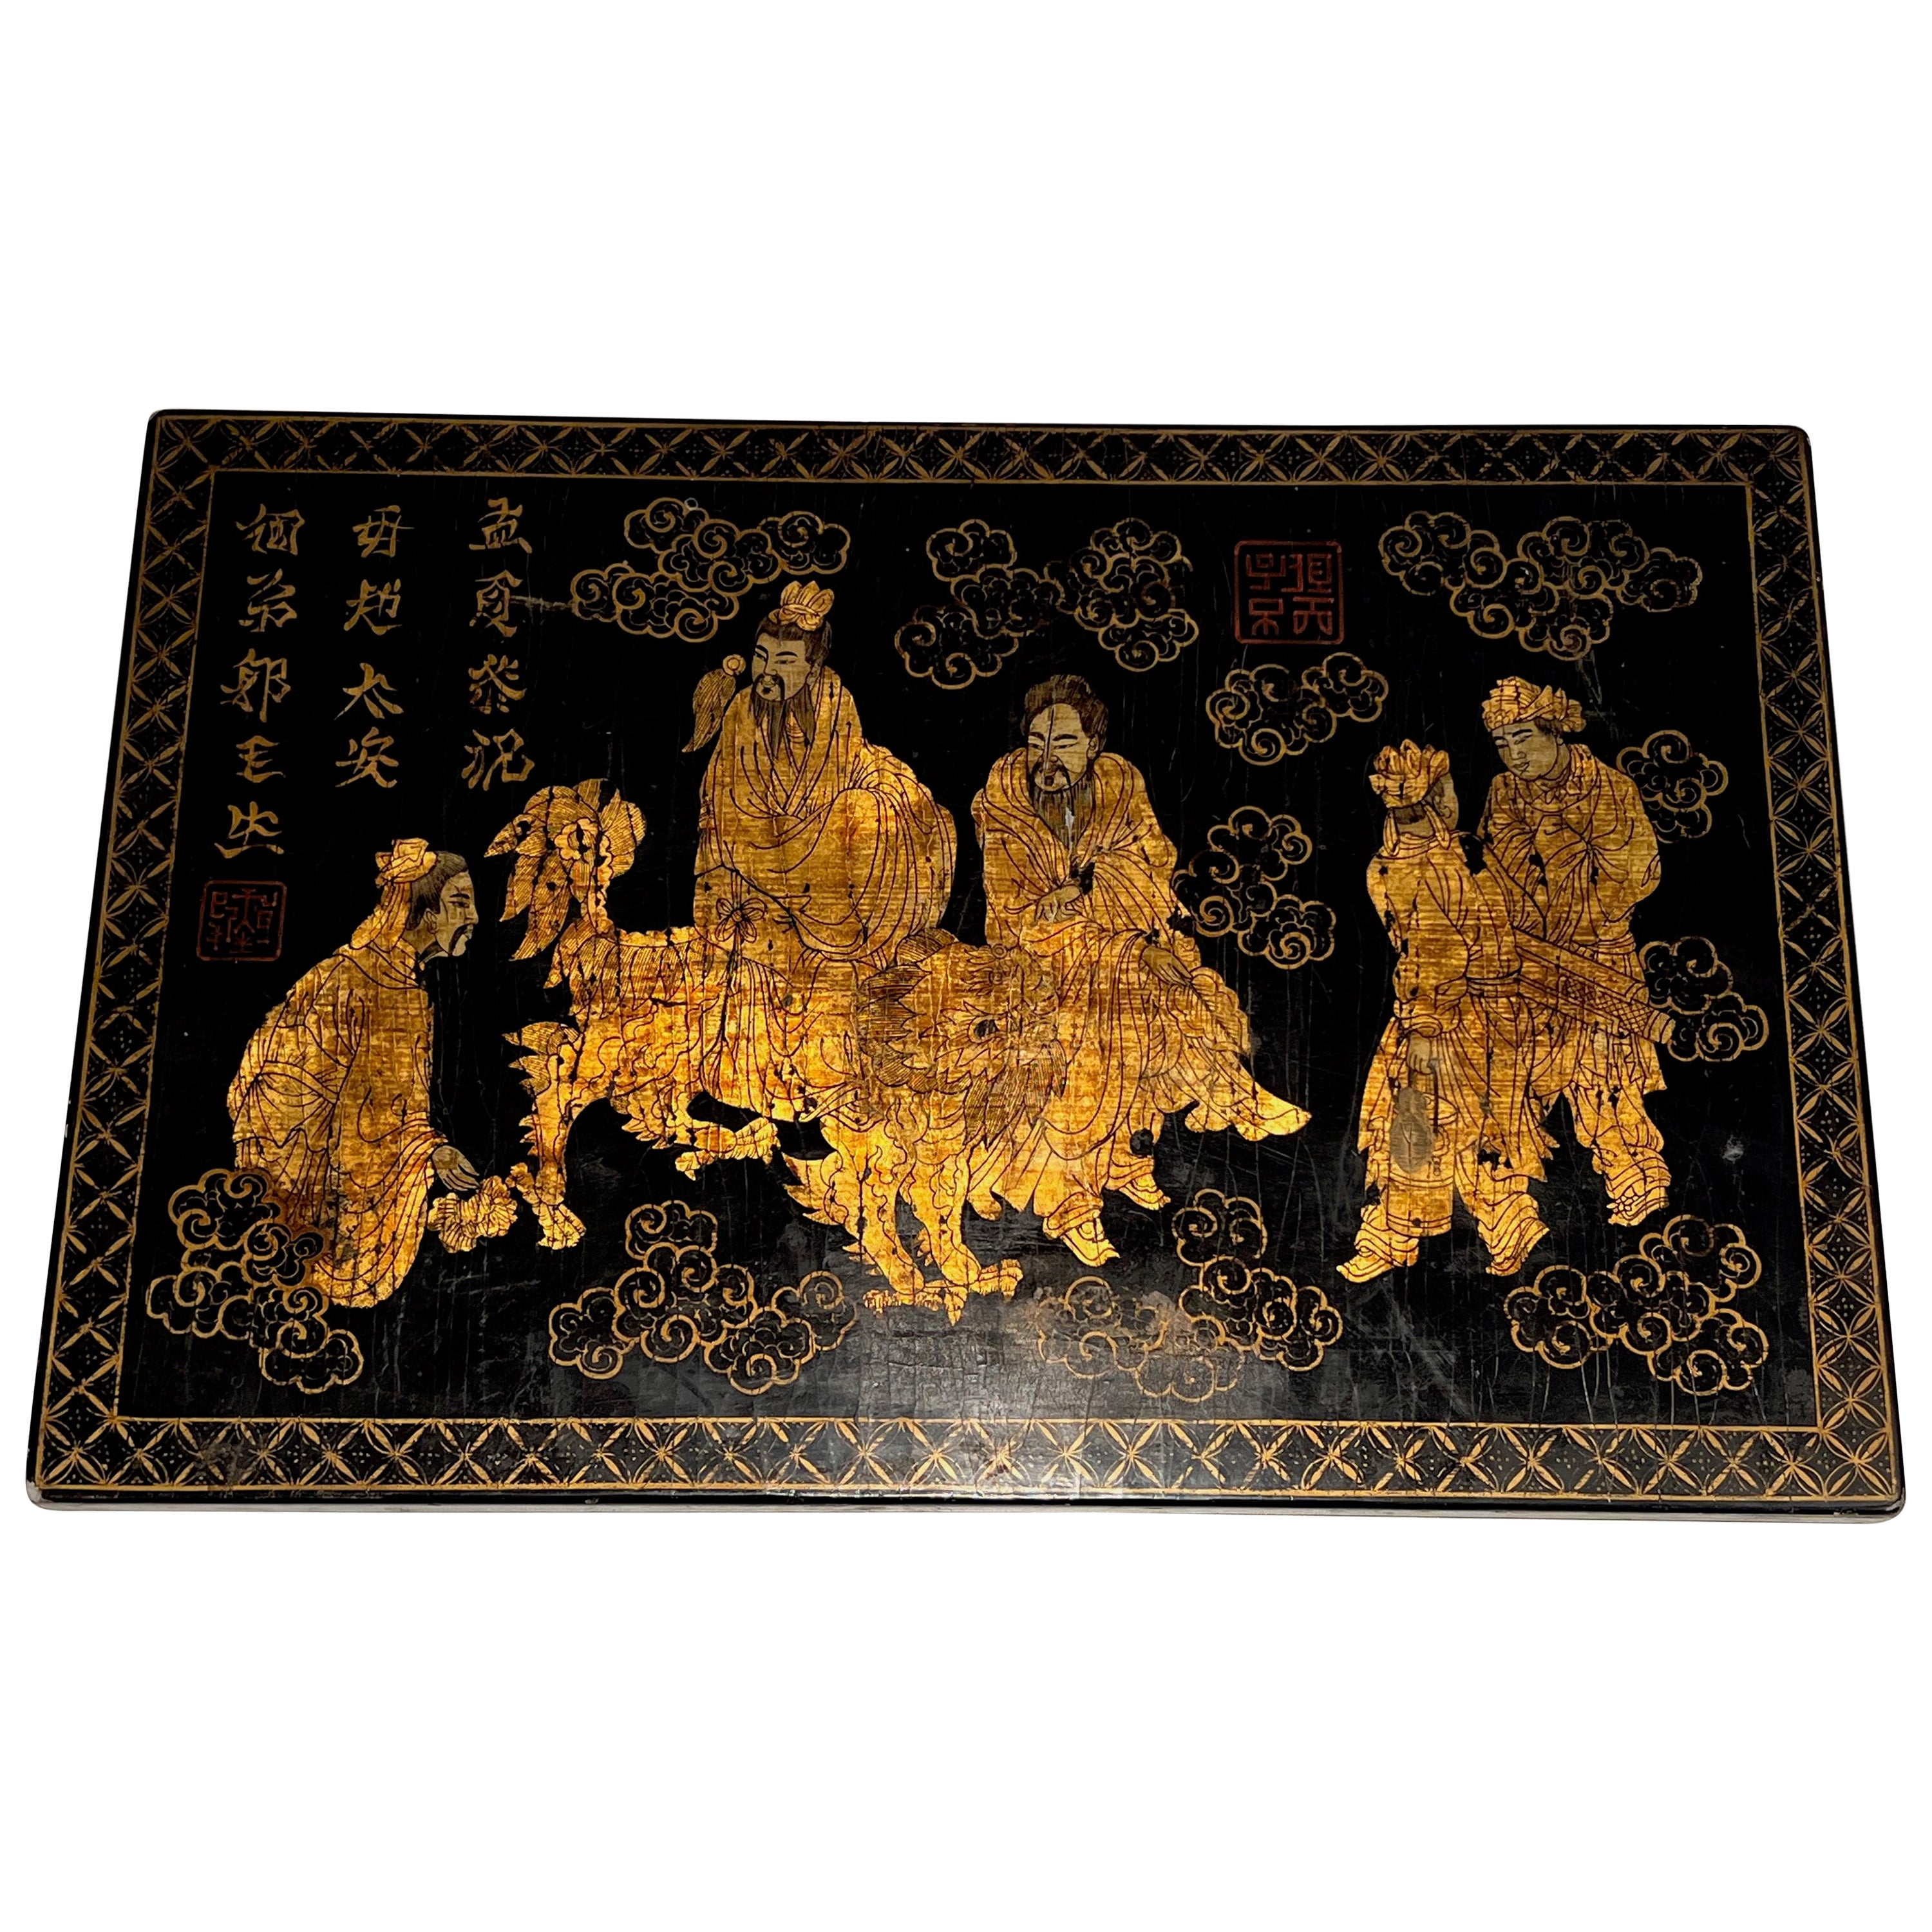 Lacquer and Gilding Painting with Chinese Decors. French work. Circa 1970